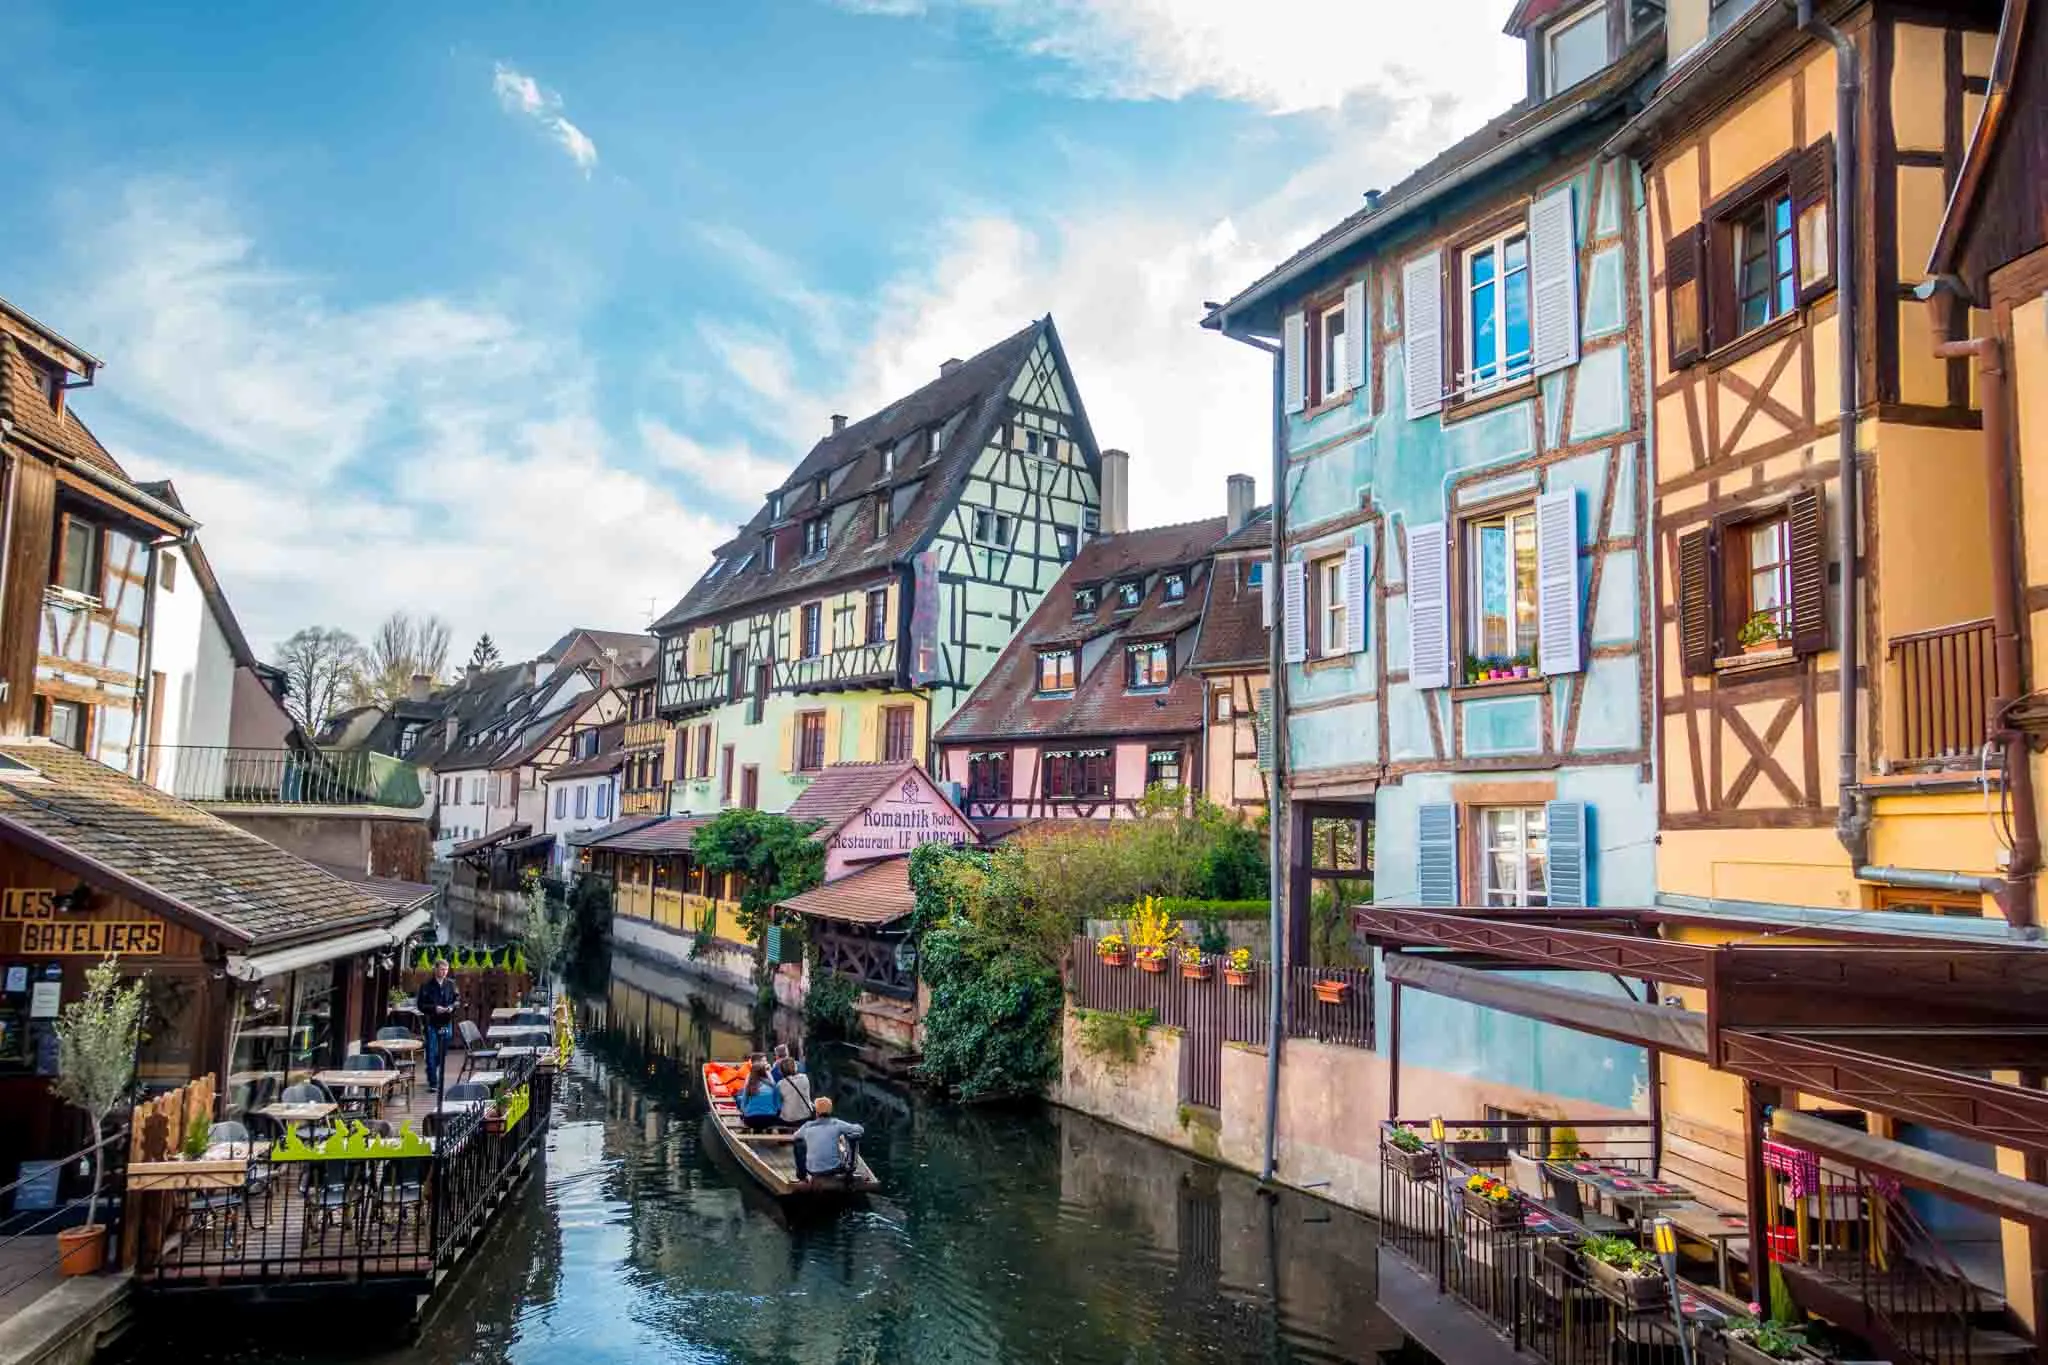 Boat floating by colorful half-timbered buildings